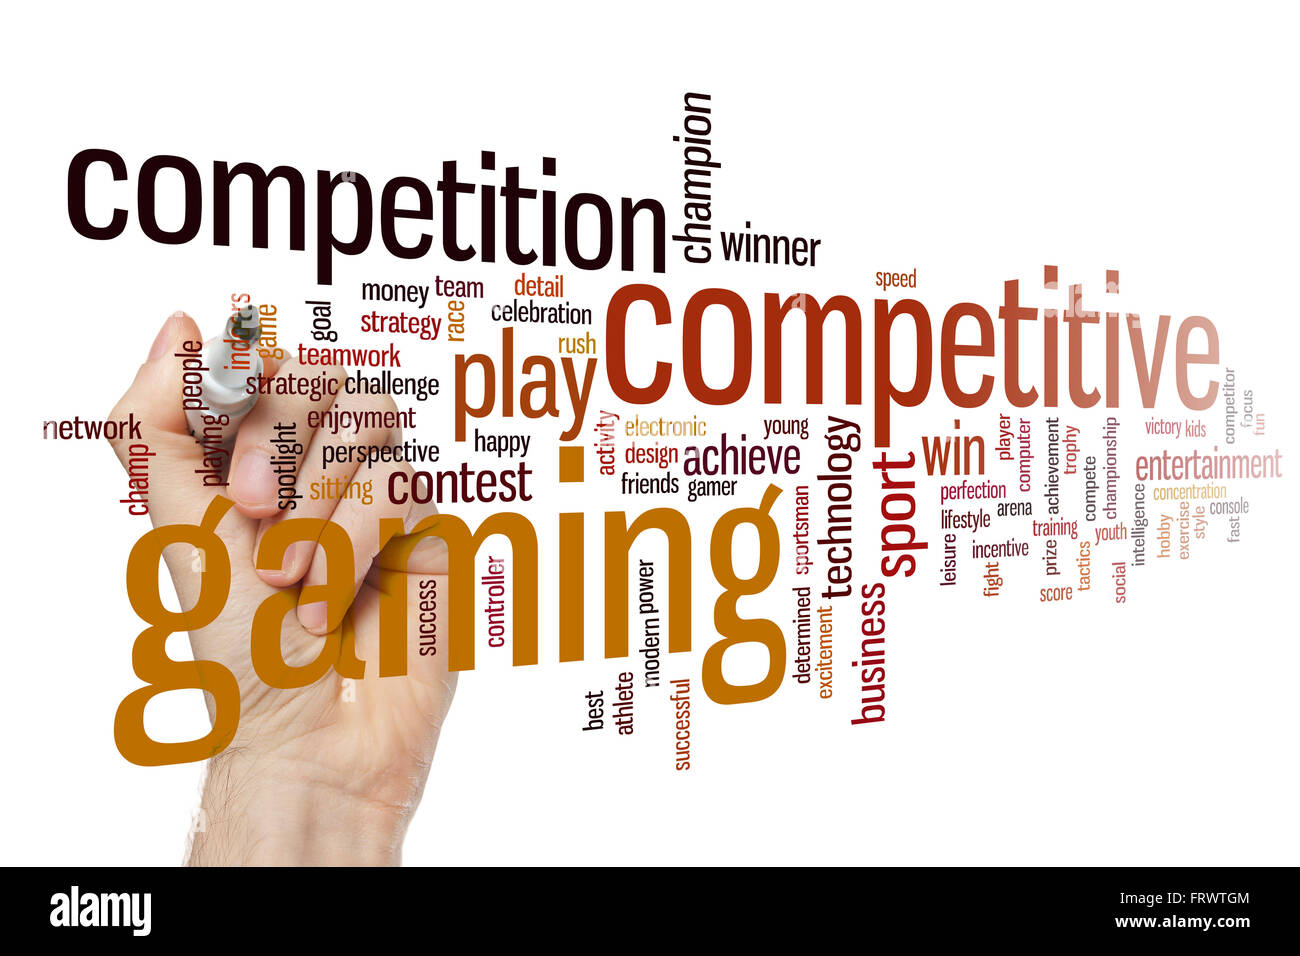 Competitive gaming concept word cloud background Stock Photo